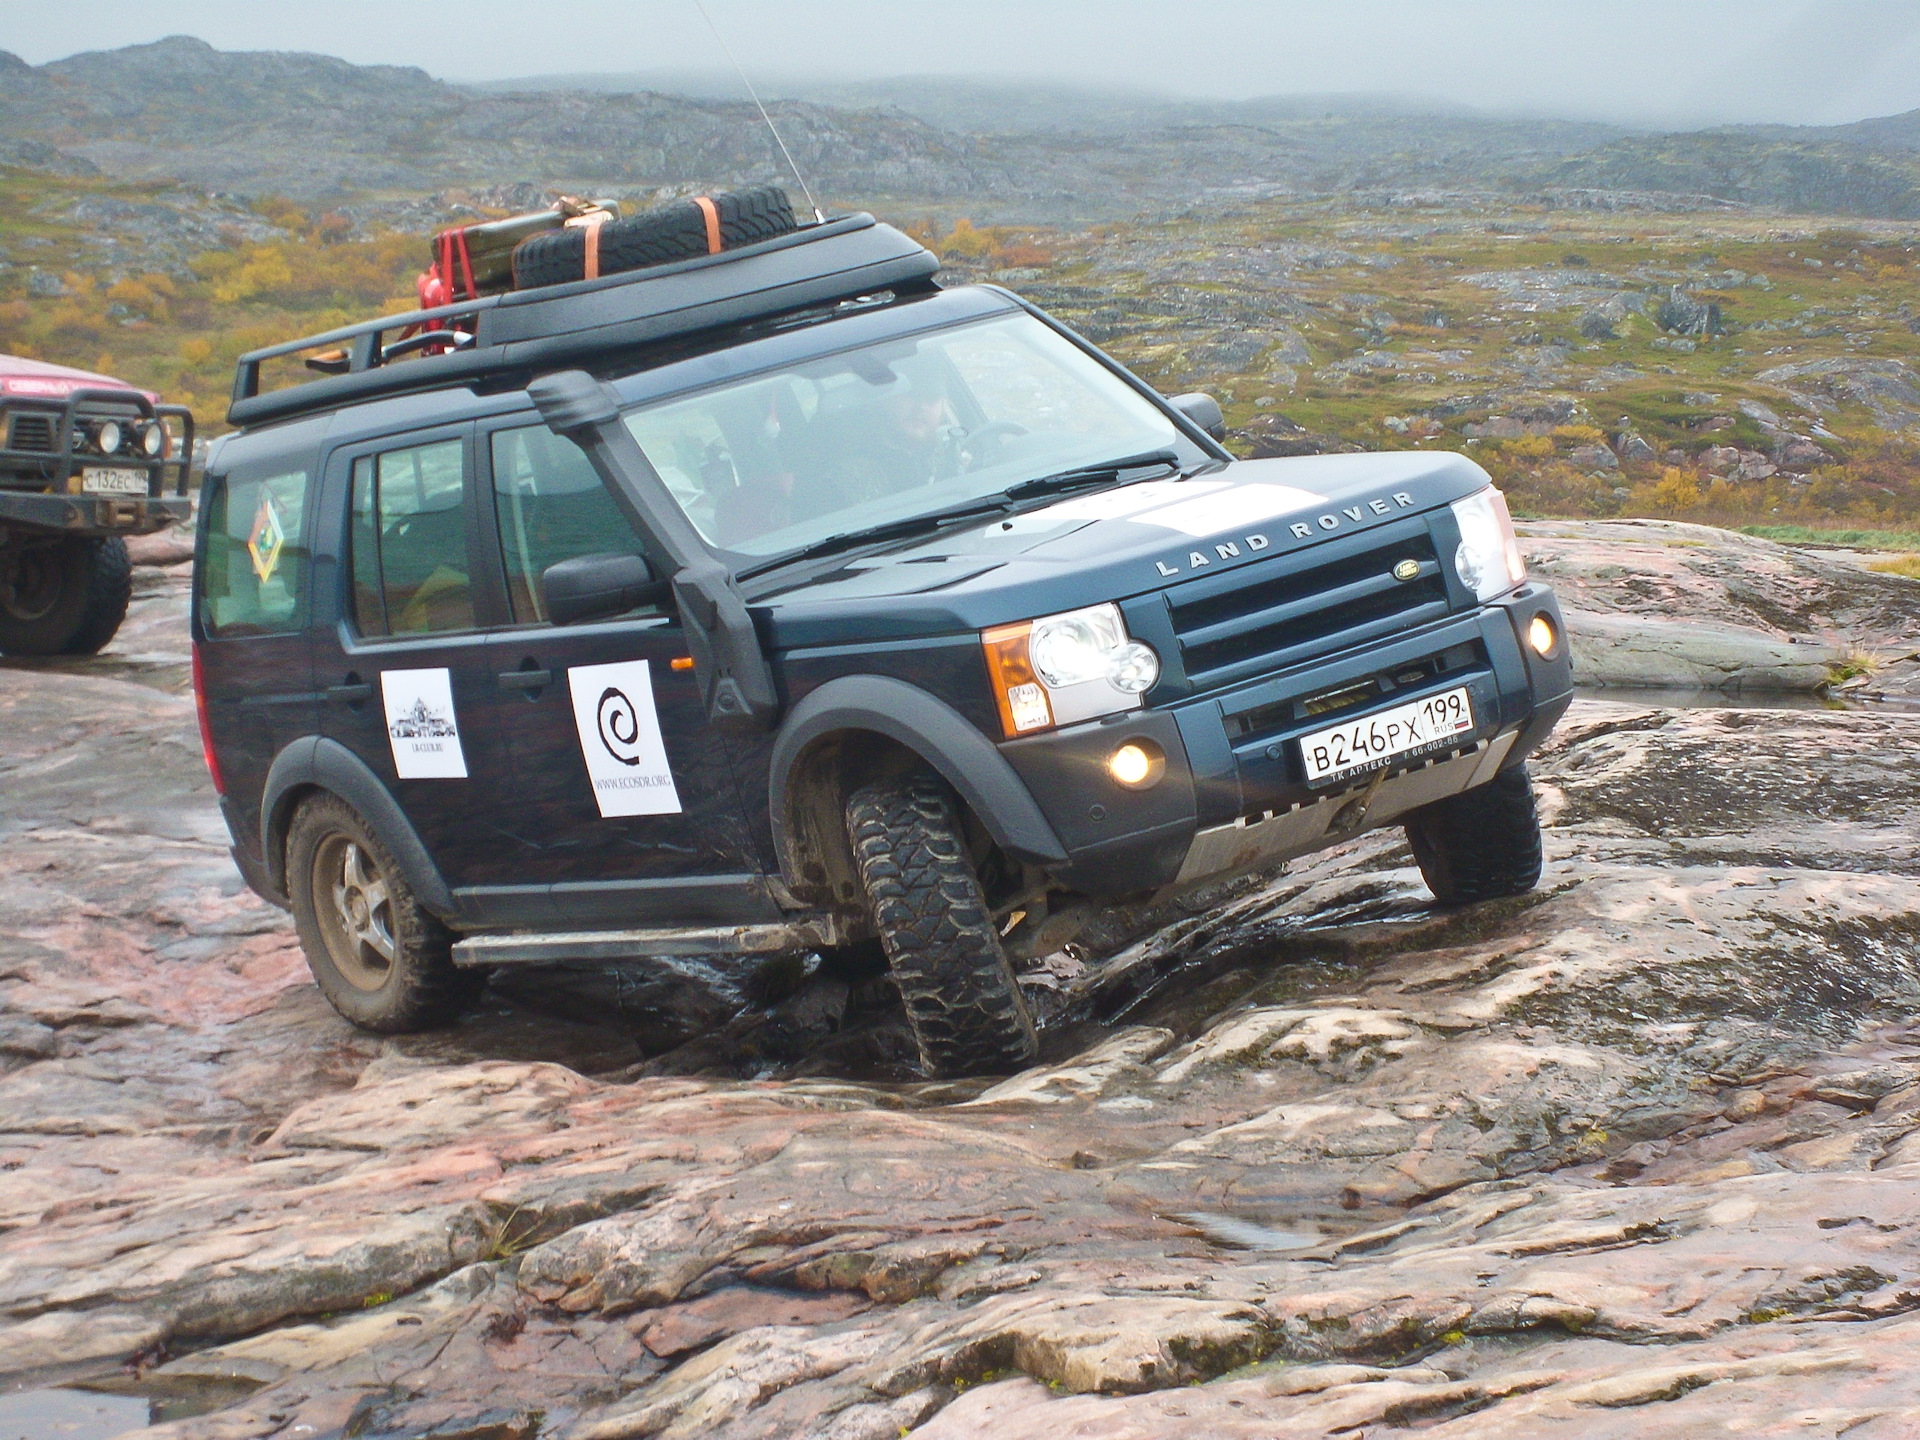 Дискавери отключен. Land Rover Discovery 3 Offroad. Ленд Ровер Дискавери 4 Expedition. Land Rover Discovery 4 Экспедиция. Ленд Ровер Дискавери 2 Expedition.